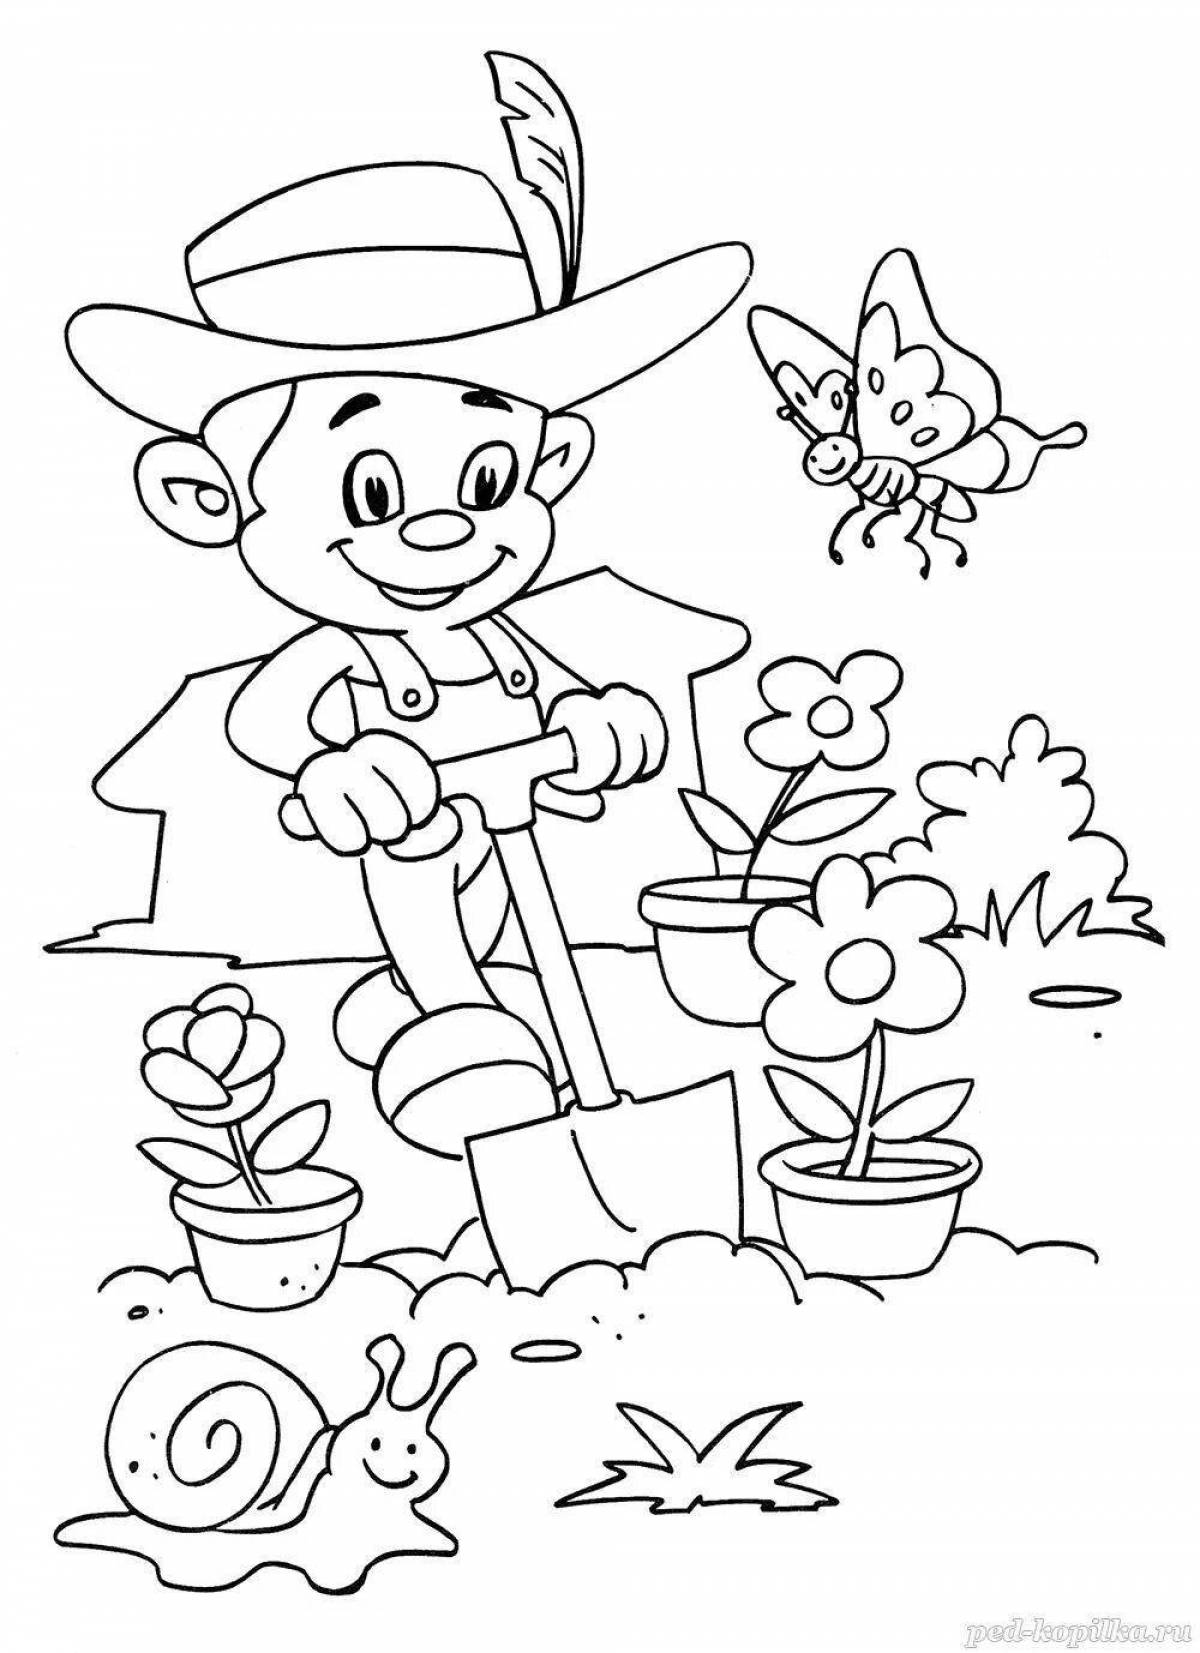 Colourful gardener coloring pages for children